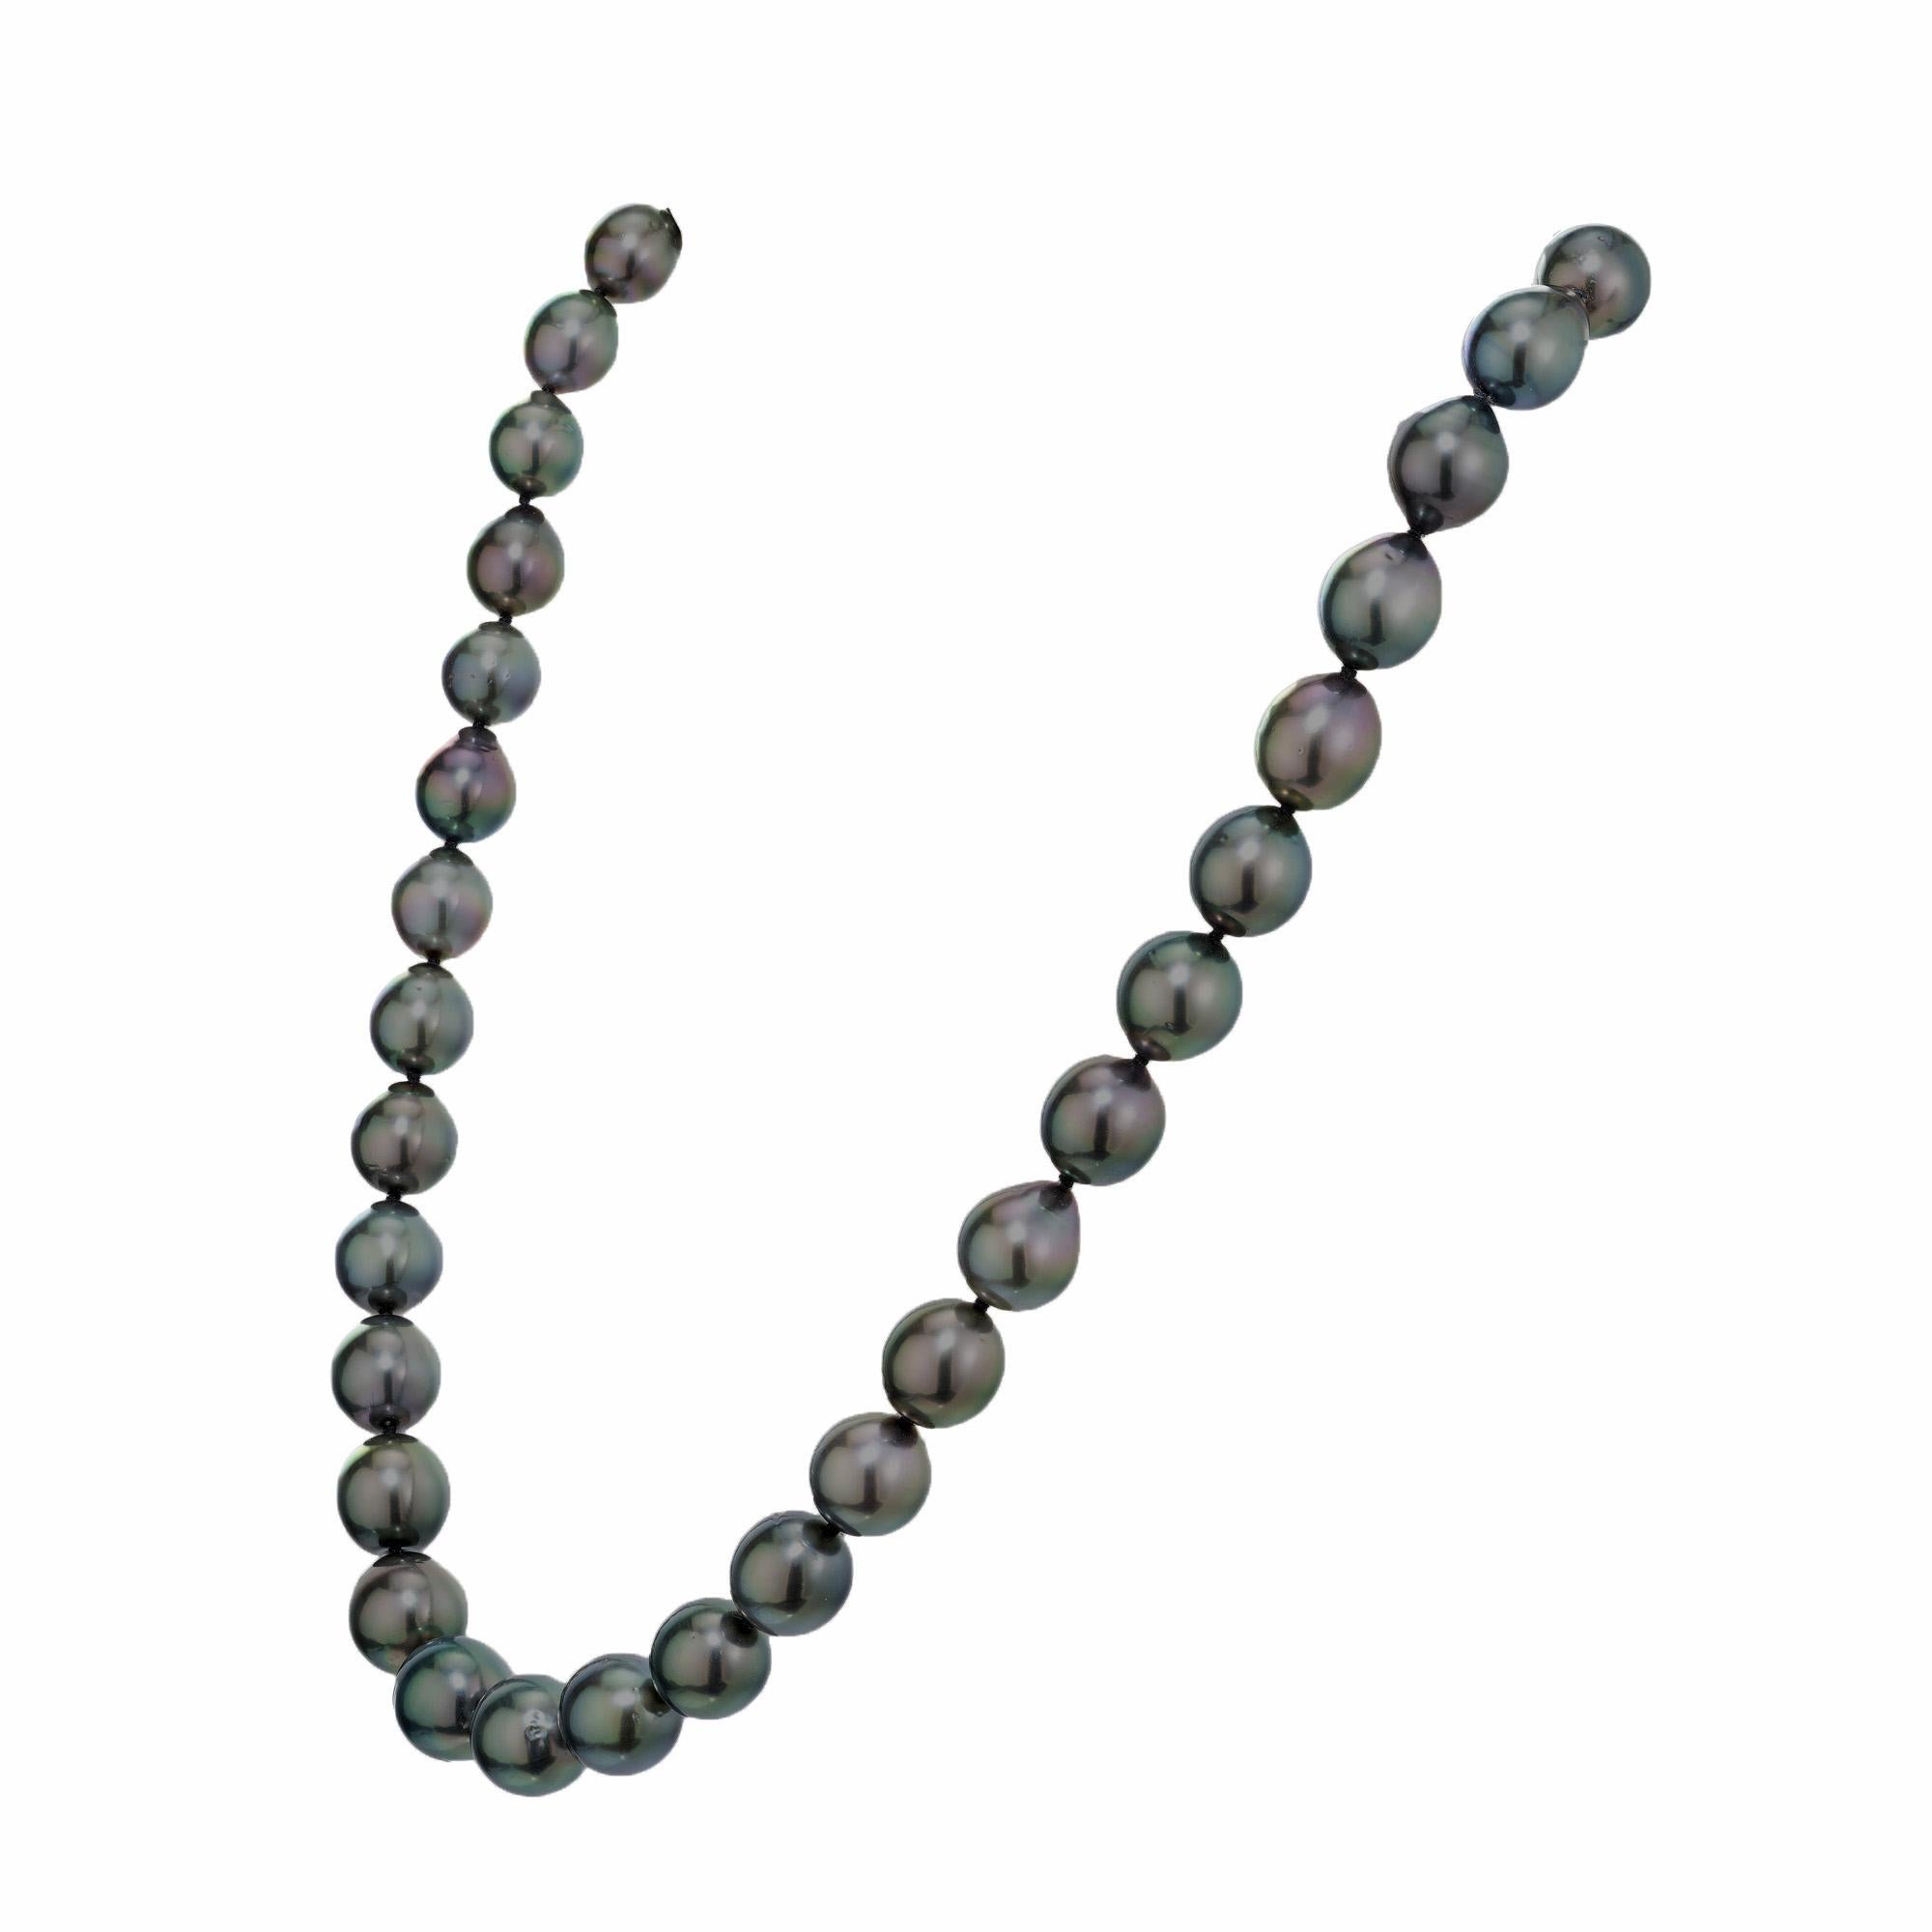 Authentic Mikimoto 18 inch black Tahitian South Sea cultured pearl necklace. Design #XNB11018NS9397.  Excellent lustre and nacre thickness. 18k white gold catch with Mikimoto hallmark around the middle. Mikimoto’s Black South Sea Cultured Pearls are